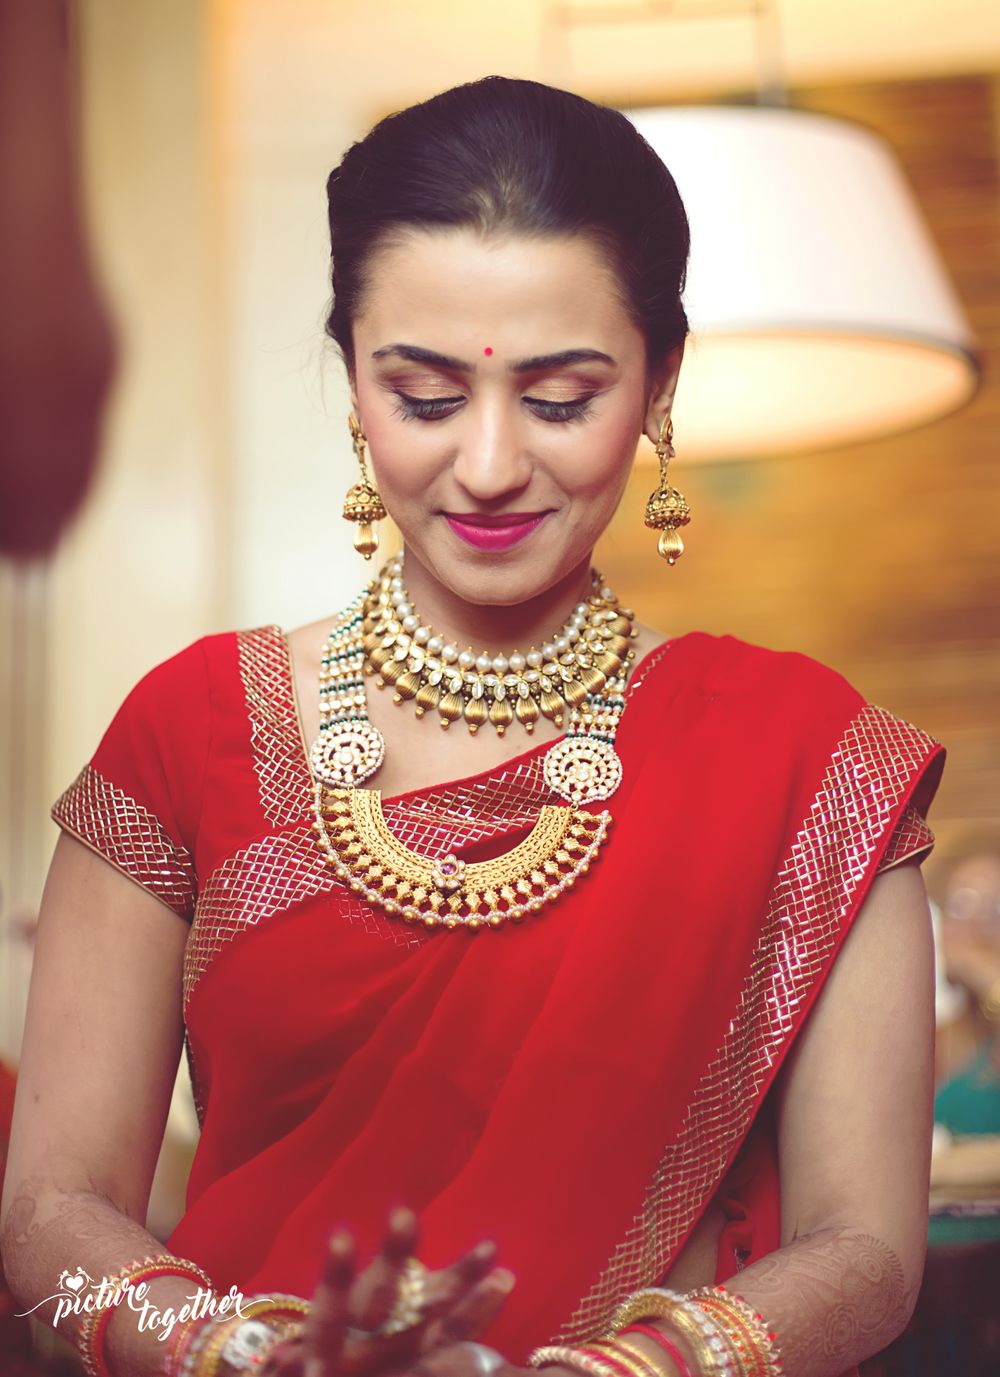 Photo of Bride in red saree and layered necklaces